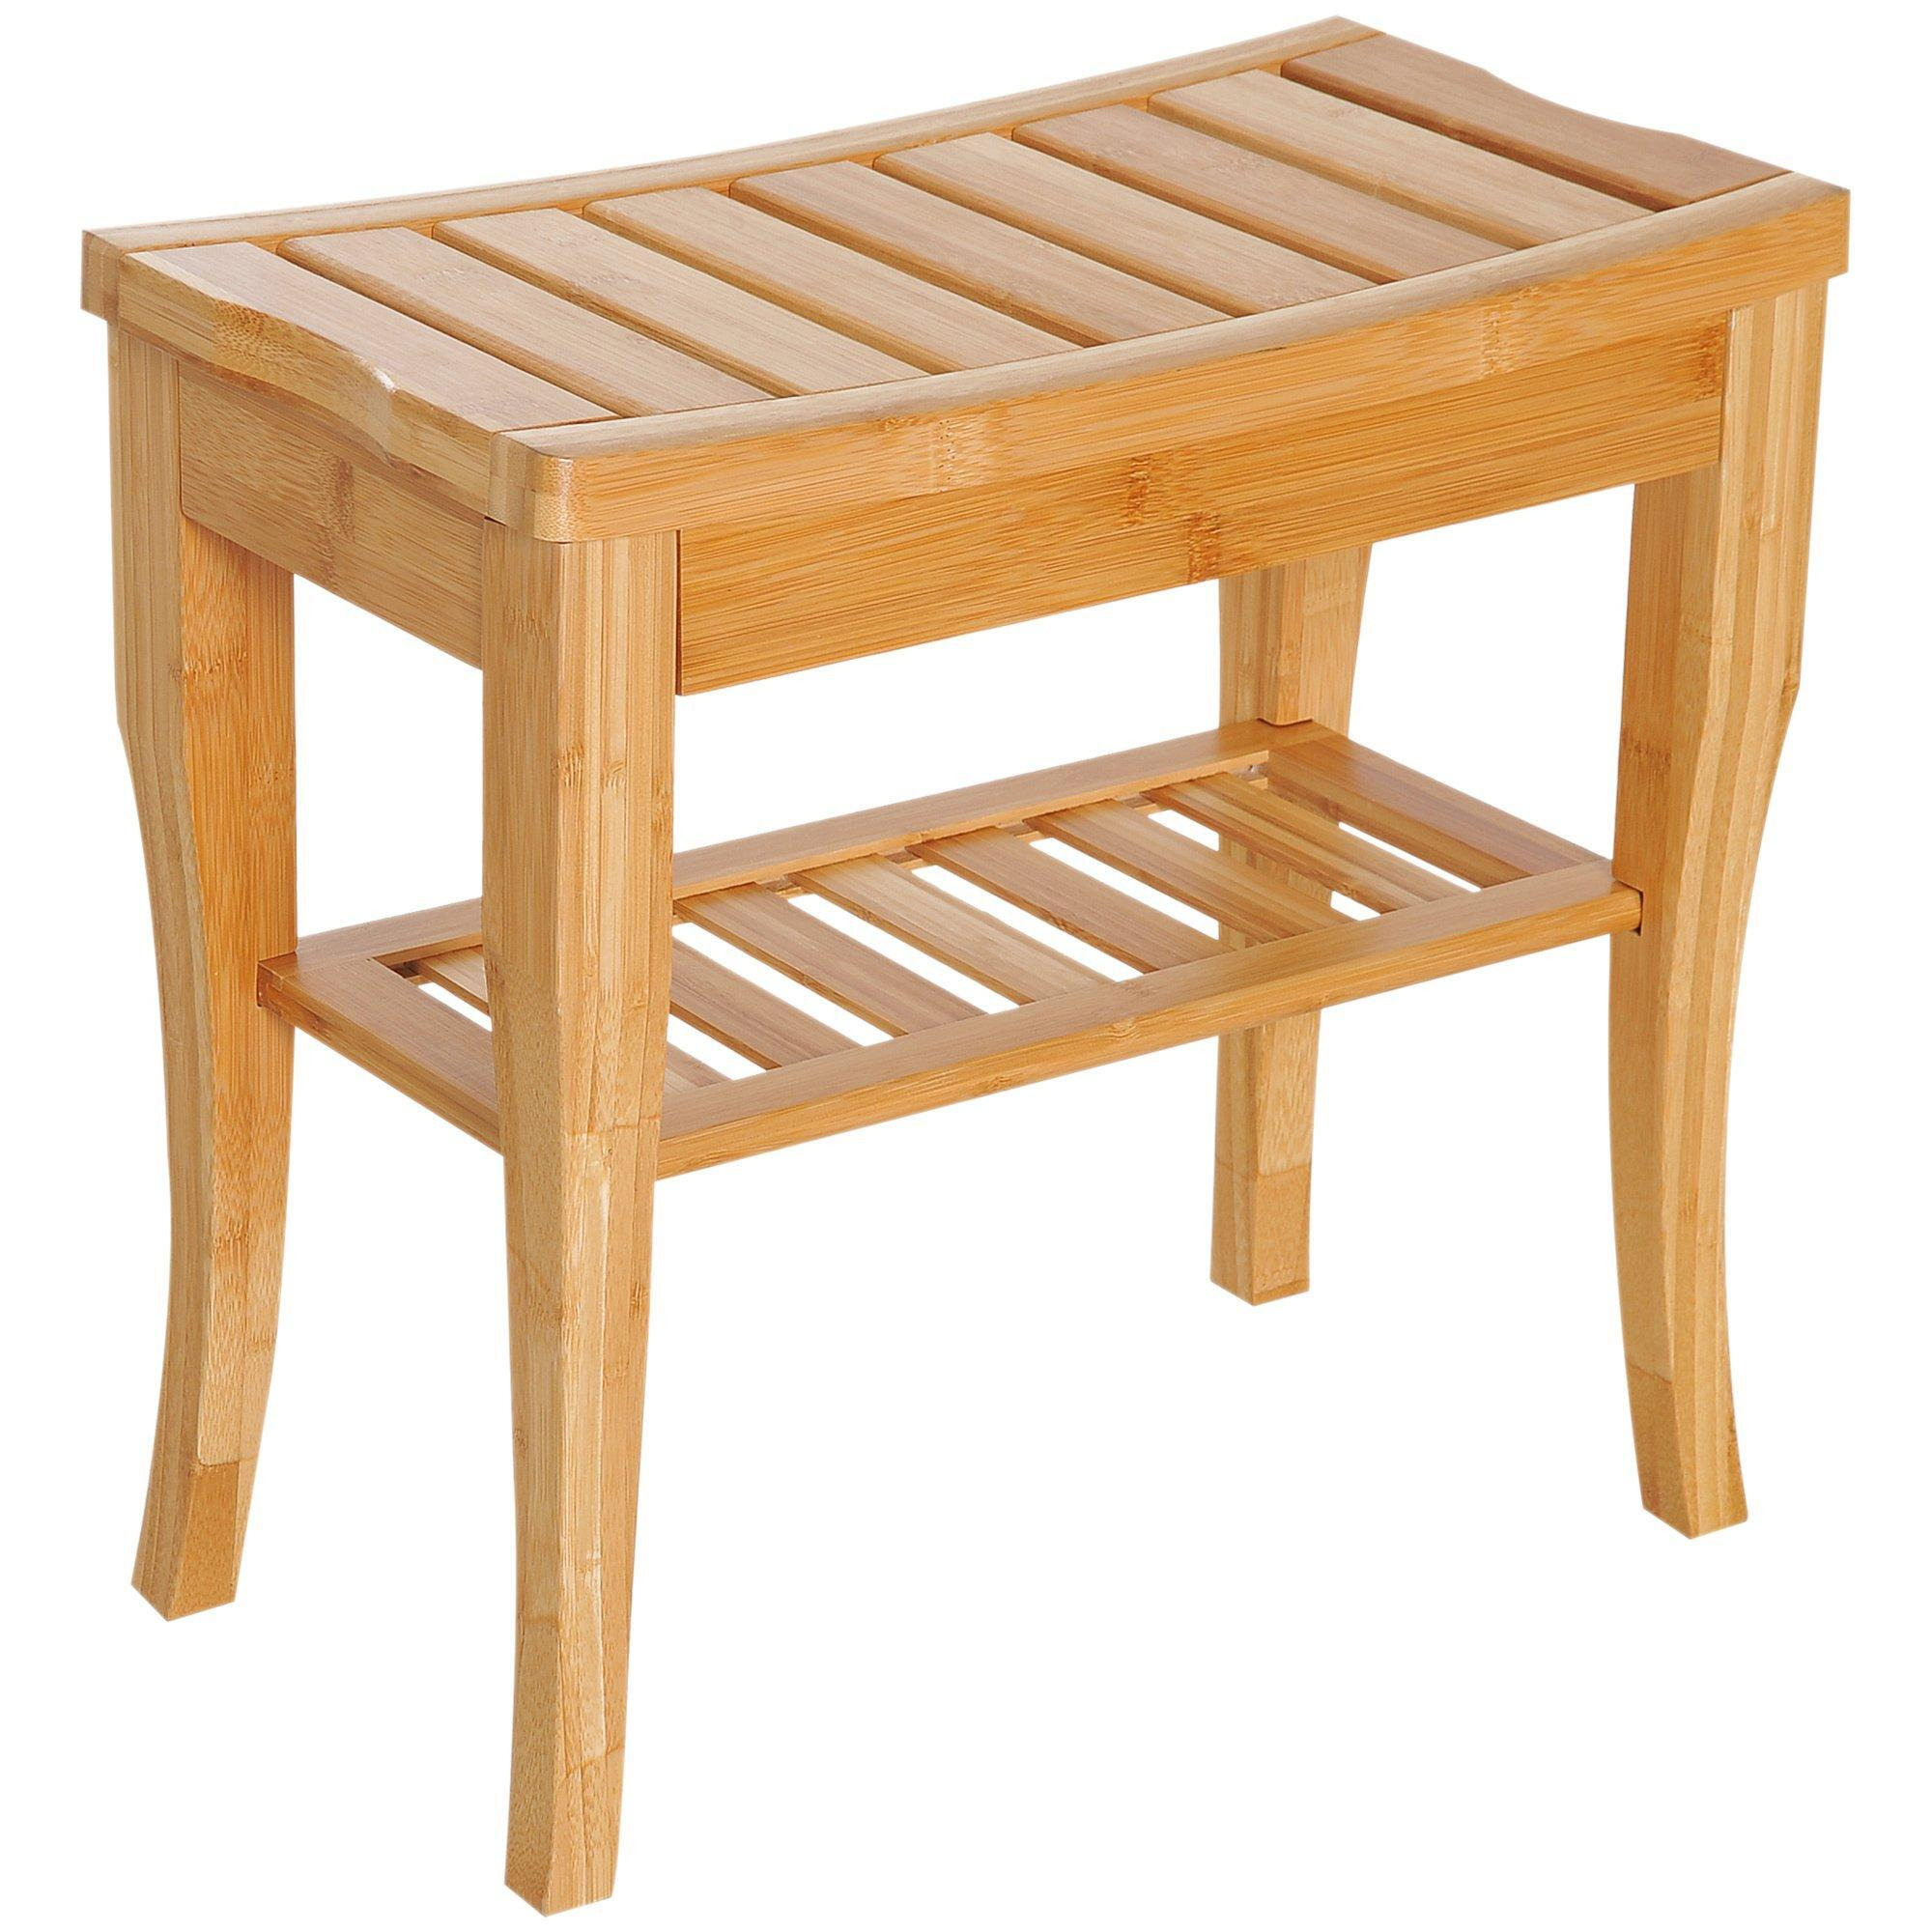 2 Tier Slatted Shower Bench Storage Seat Stool    Comfortable - image 1